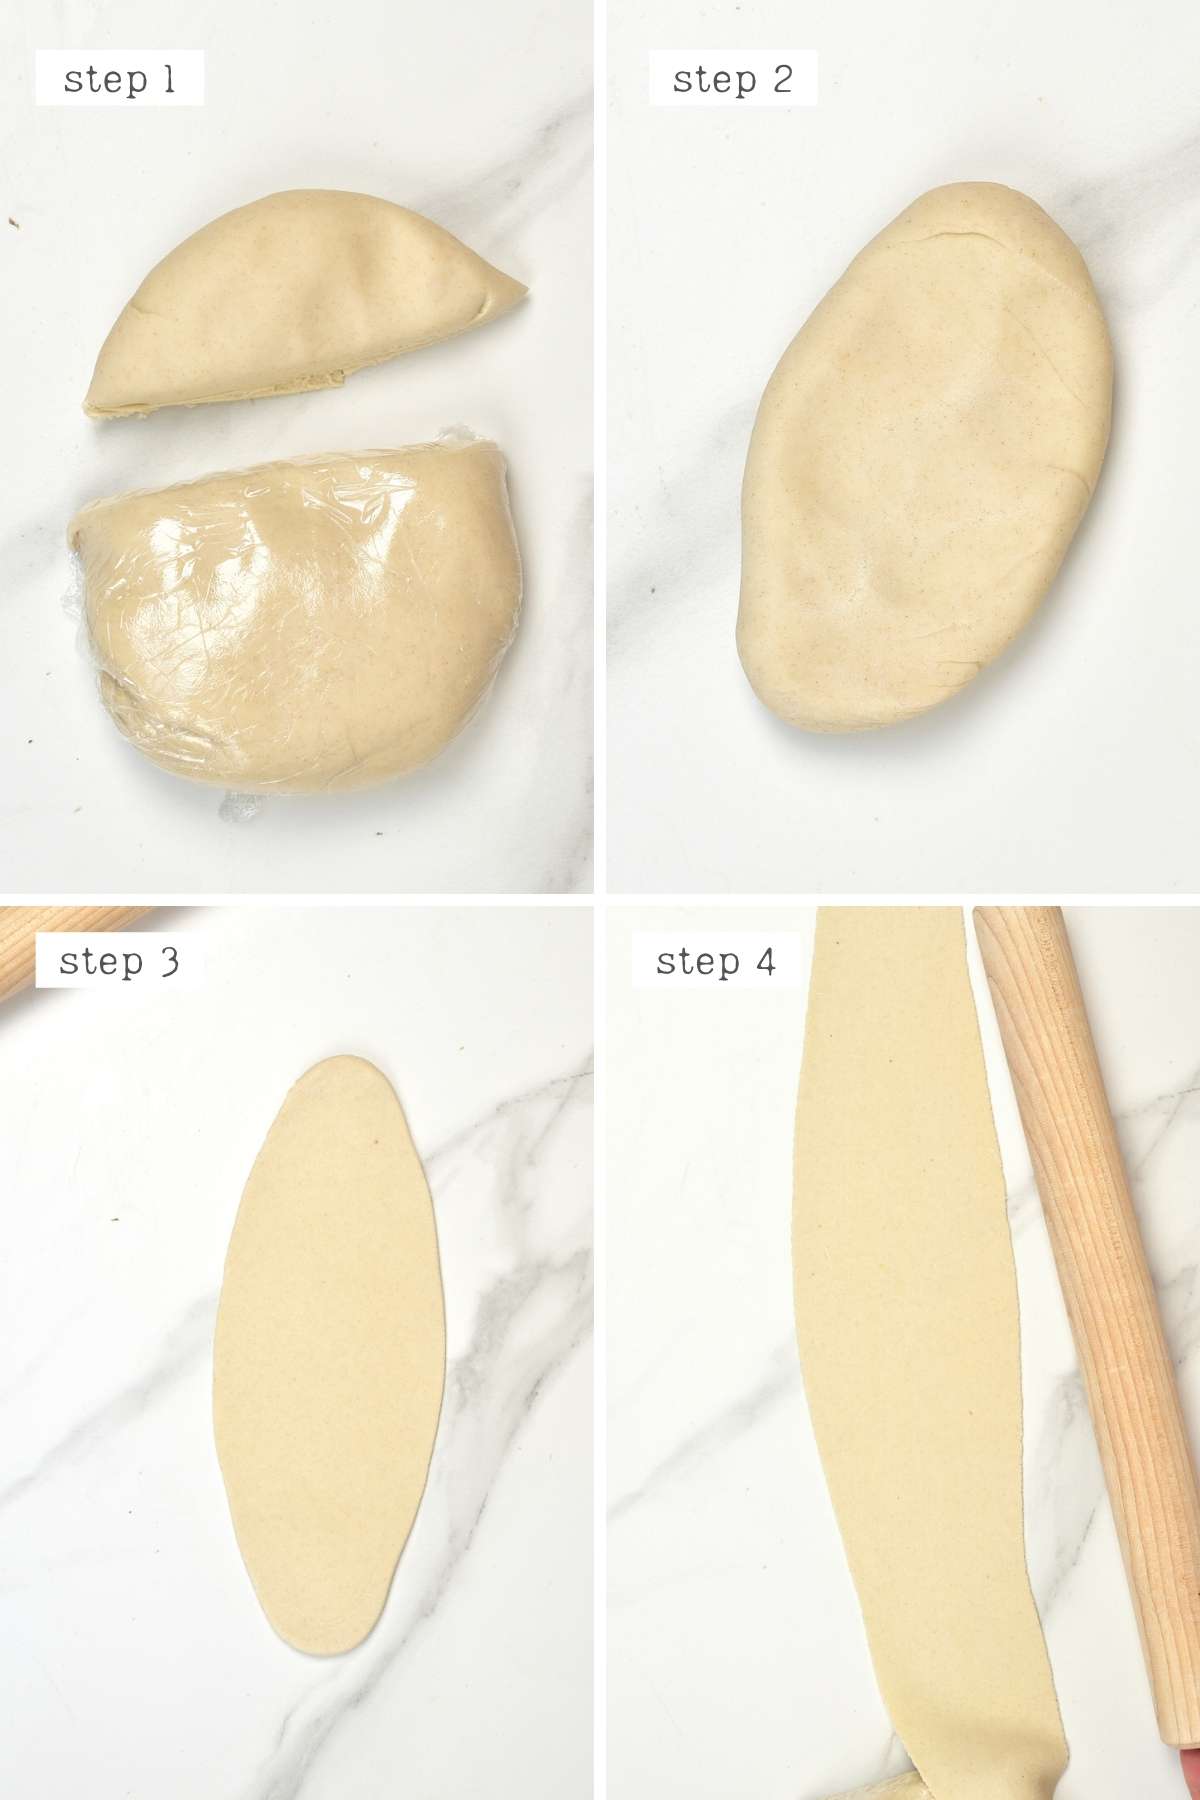 Steps for rolling out dough